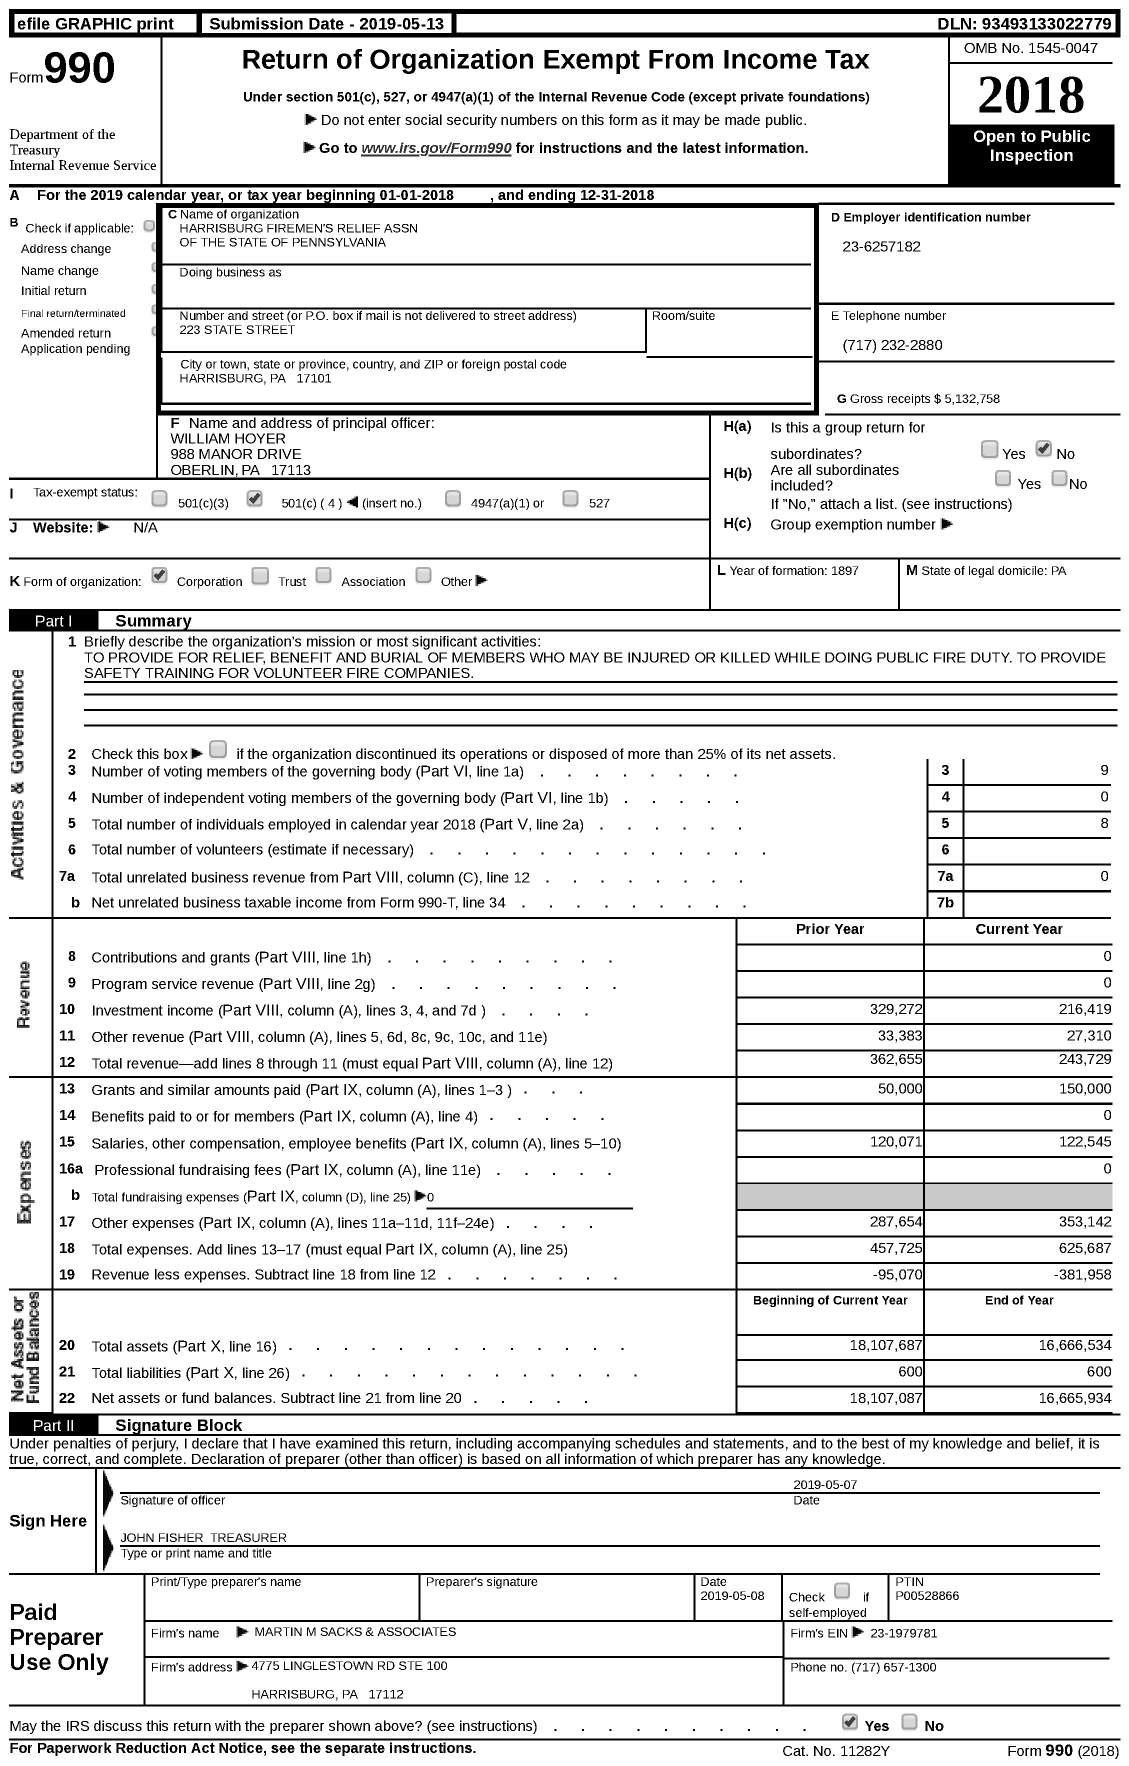 Image of first page of 2018 Form 990 for Harrisburg Firemen's Relief Association of the State of Pennsylvania